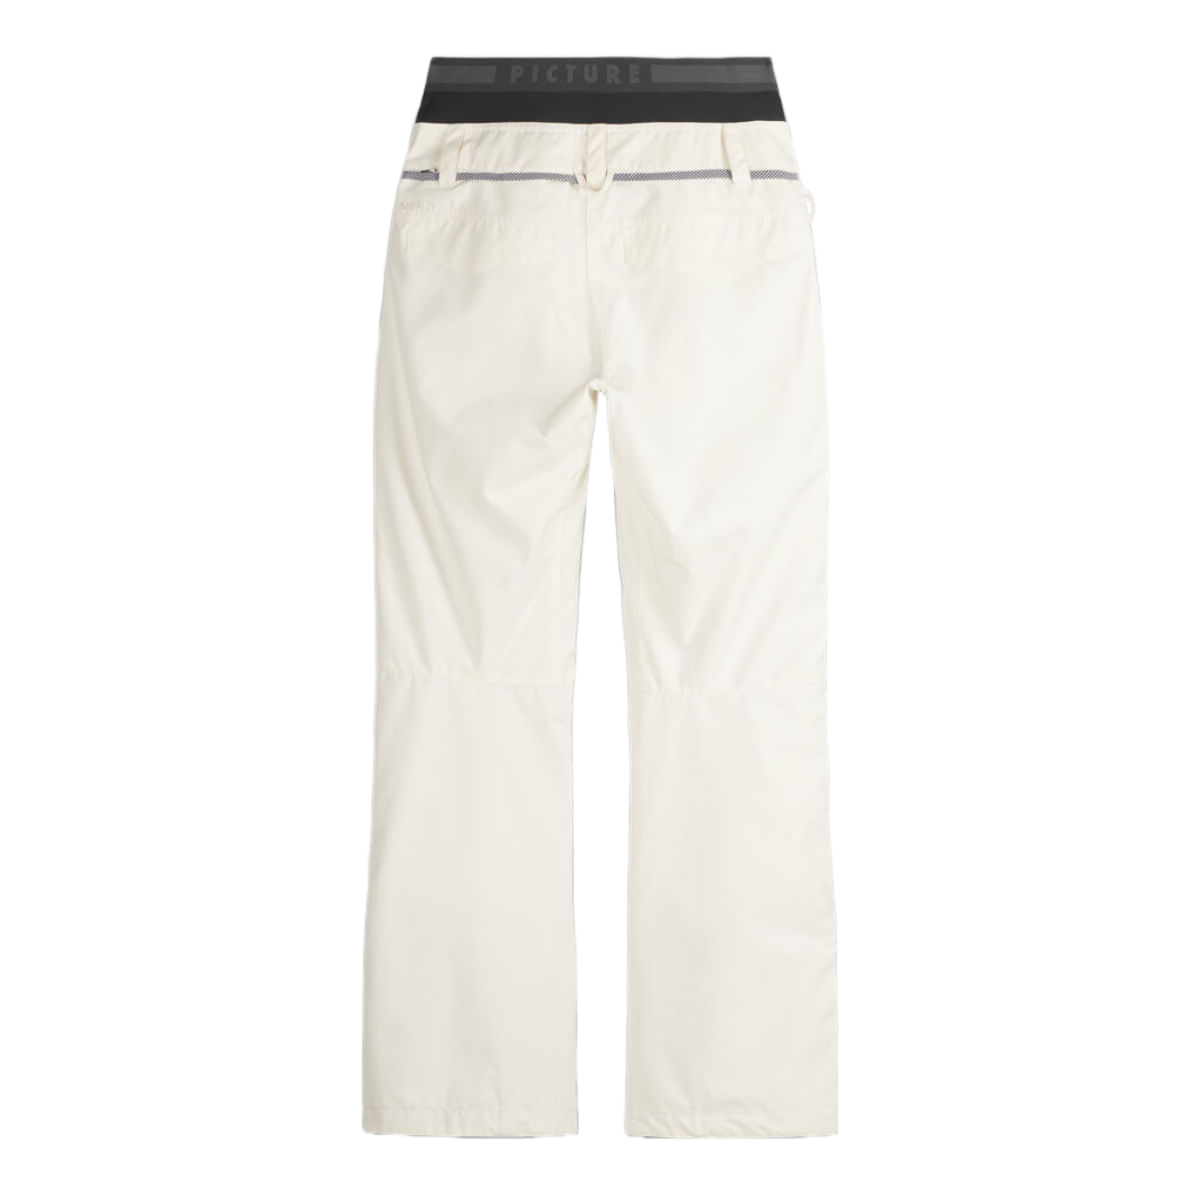 Columbia Shafer Canyon Insulated Pant - Women's